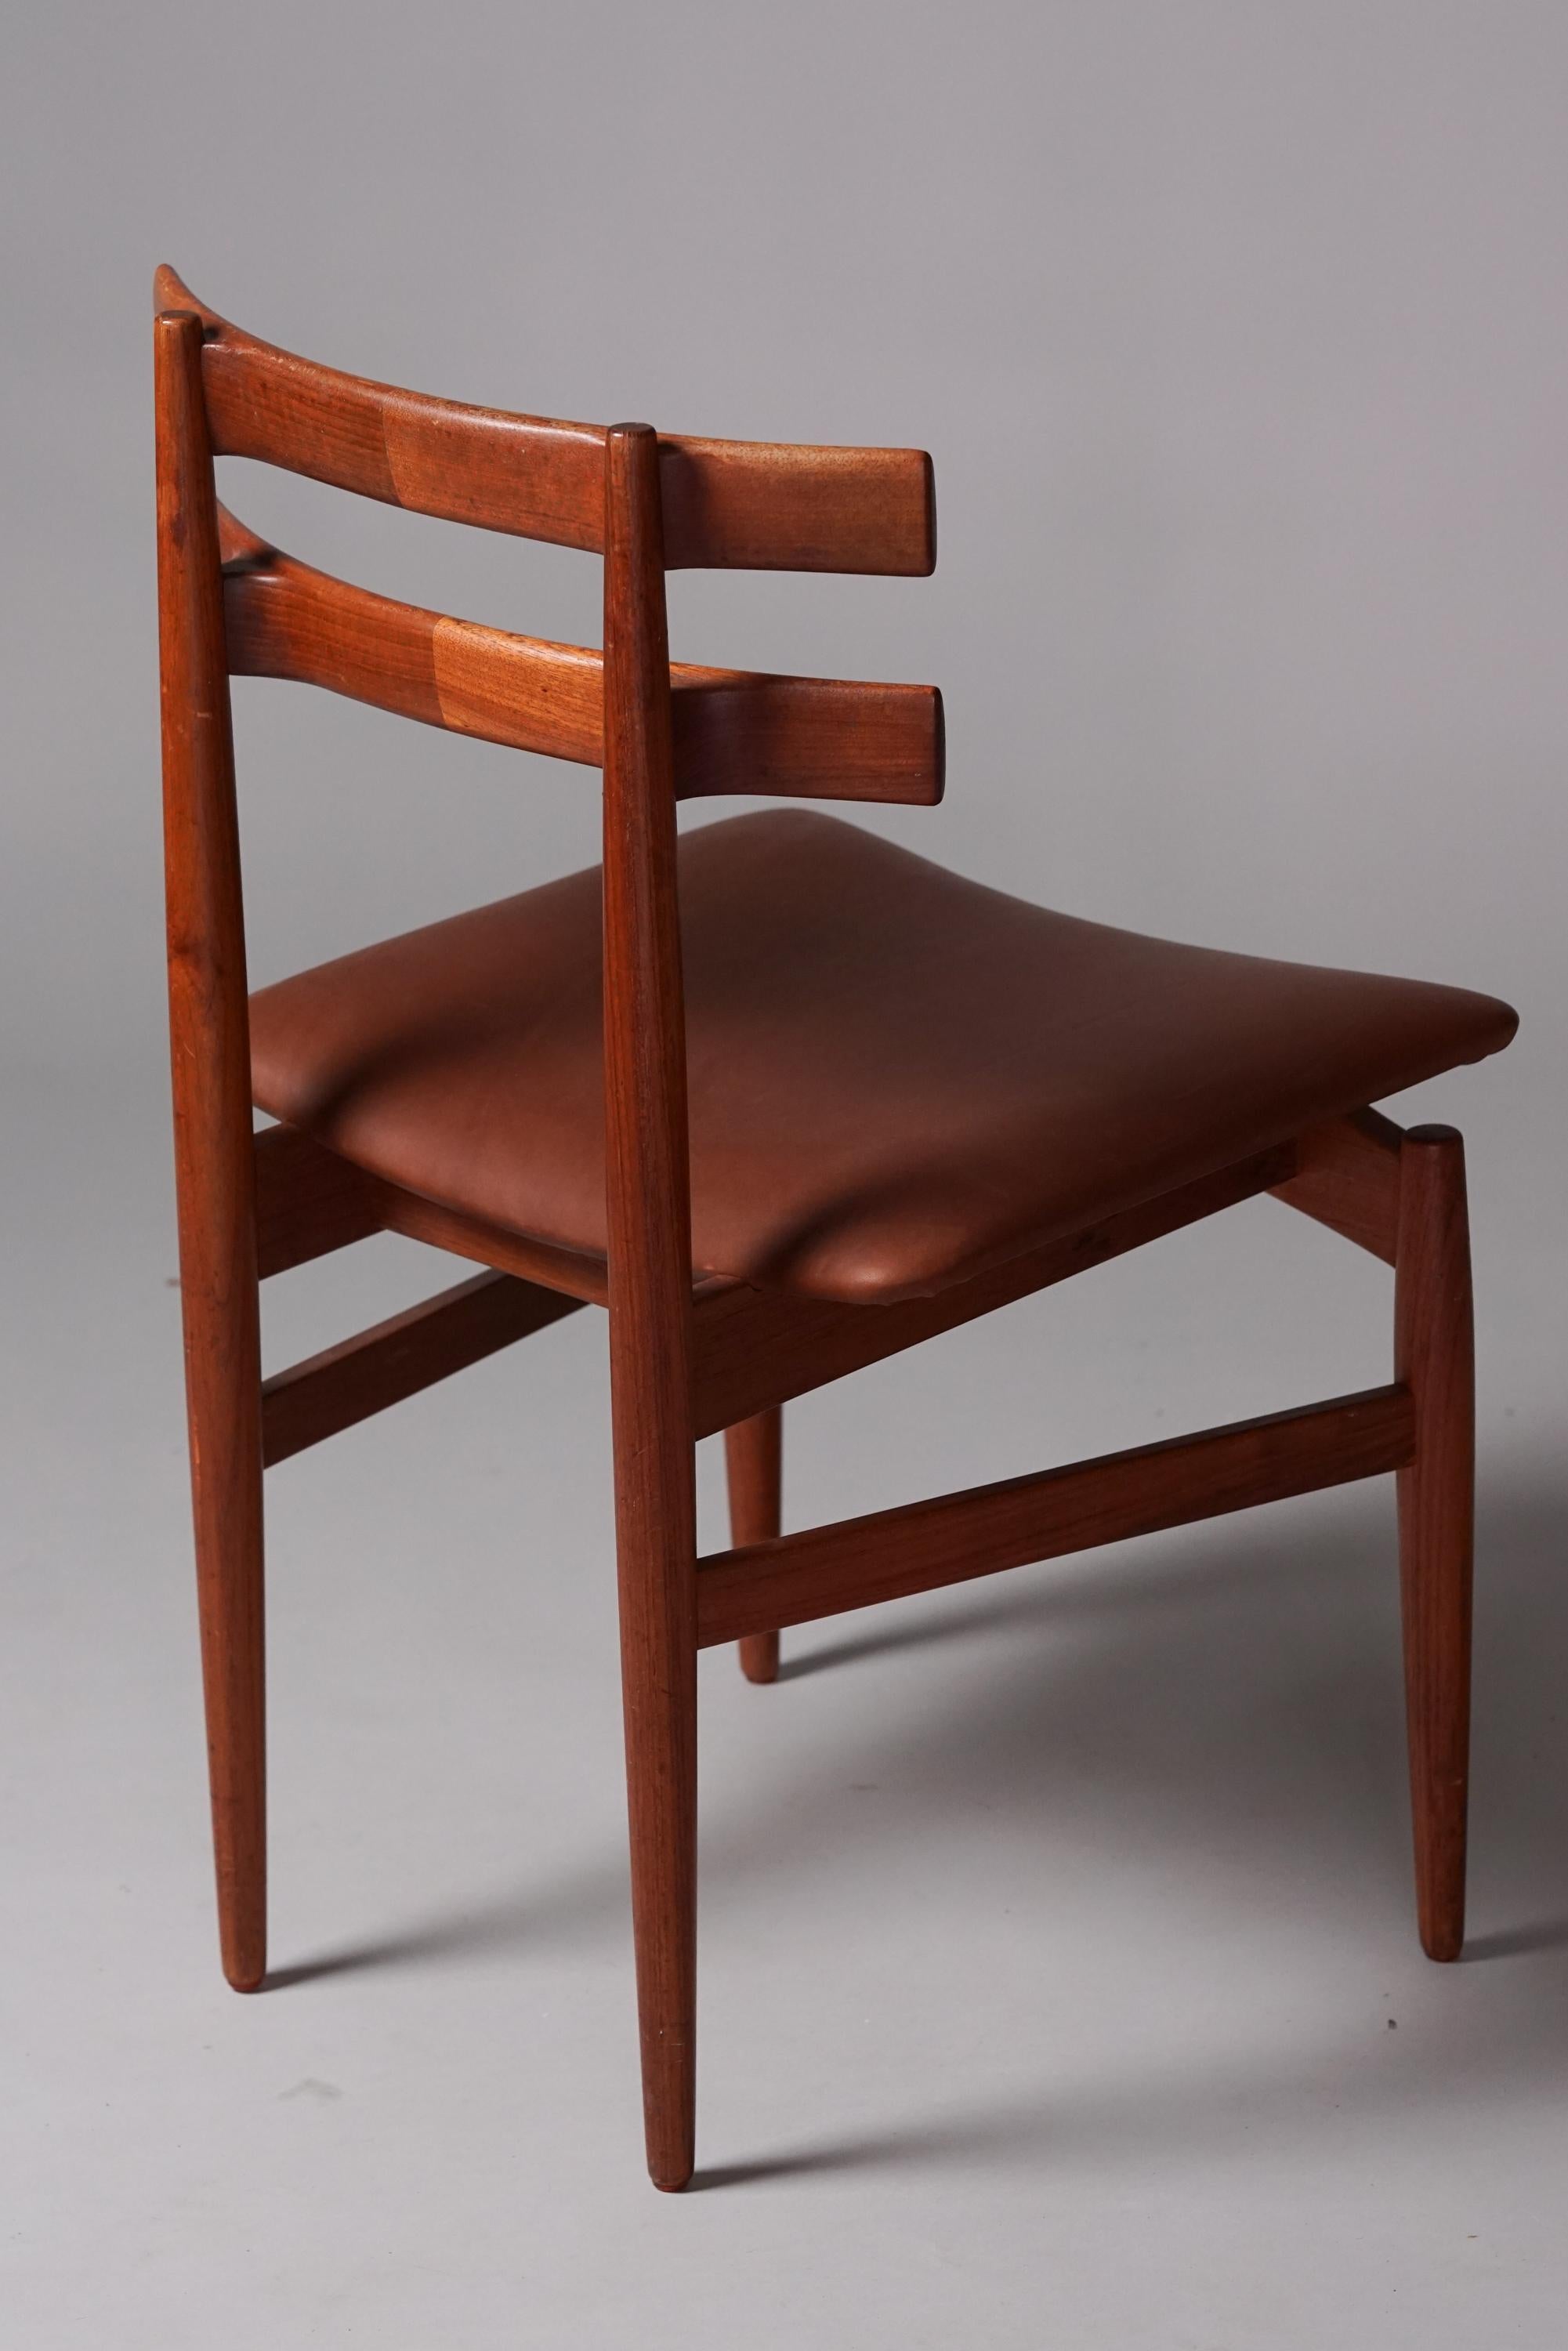 Set of Four Teak Chairs, Poul Hundevad, 1960s For Sale 3